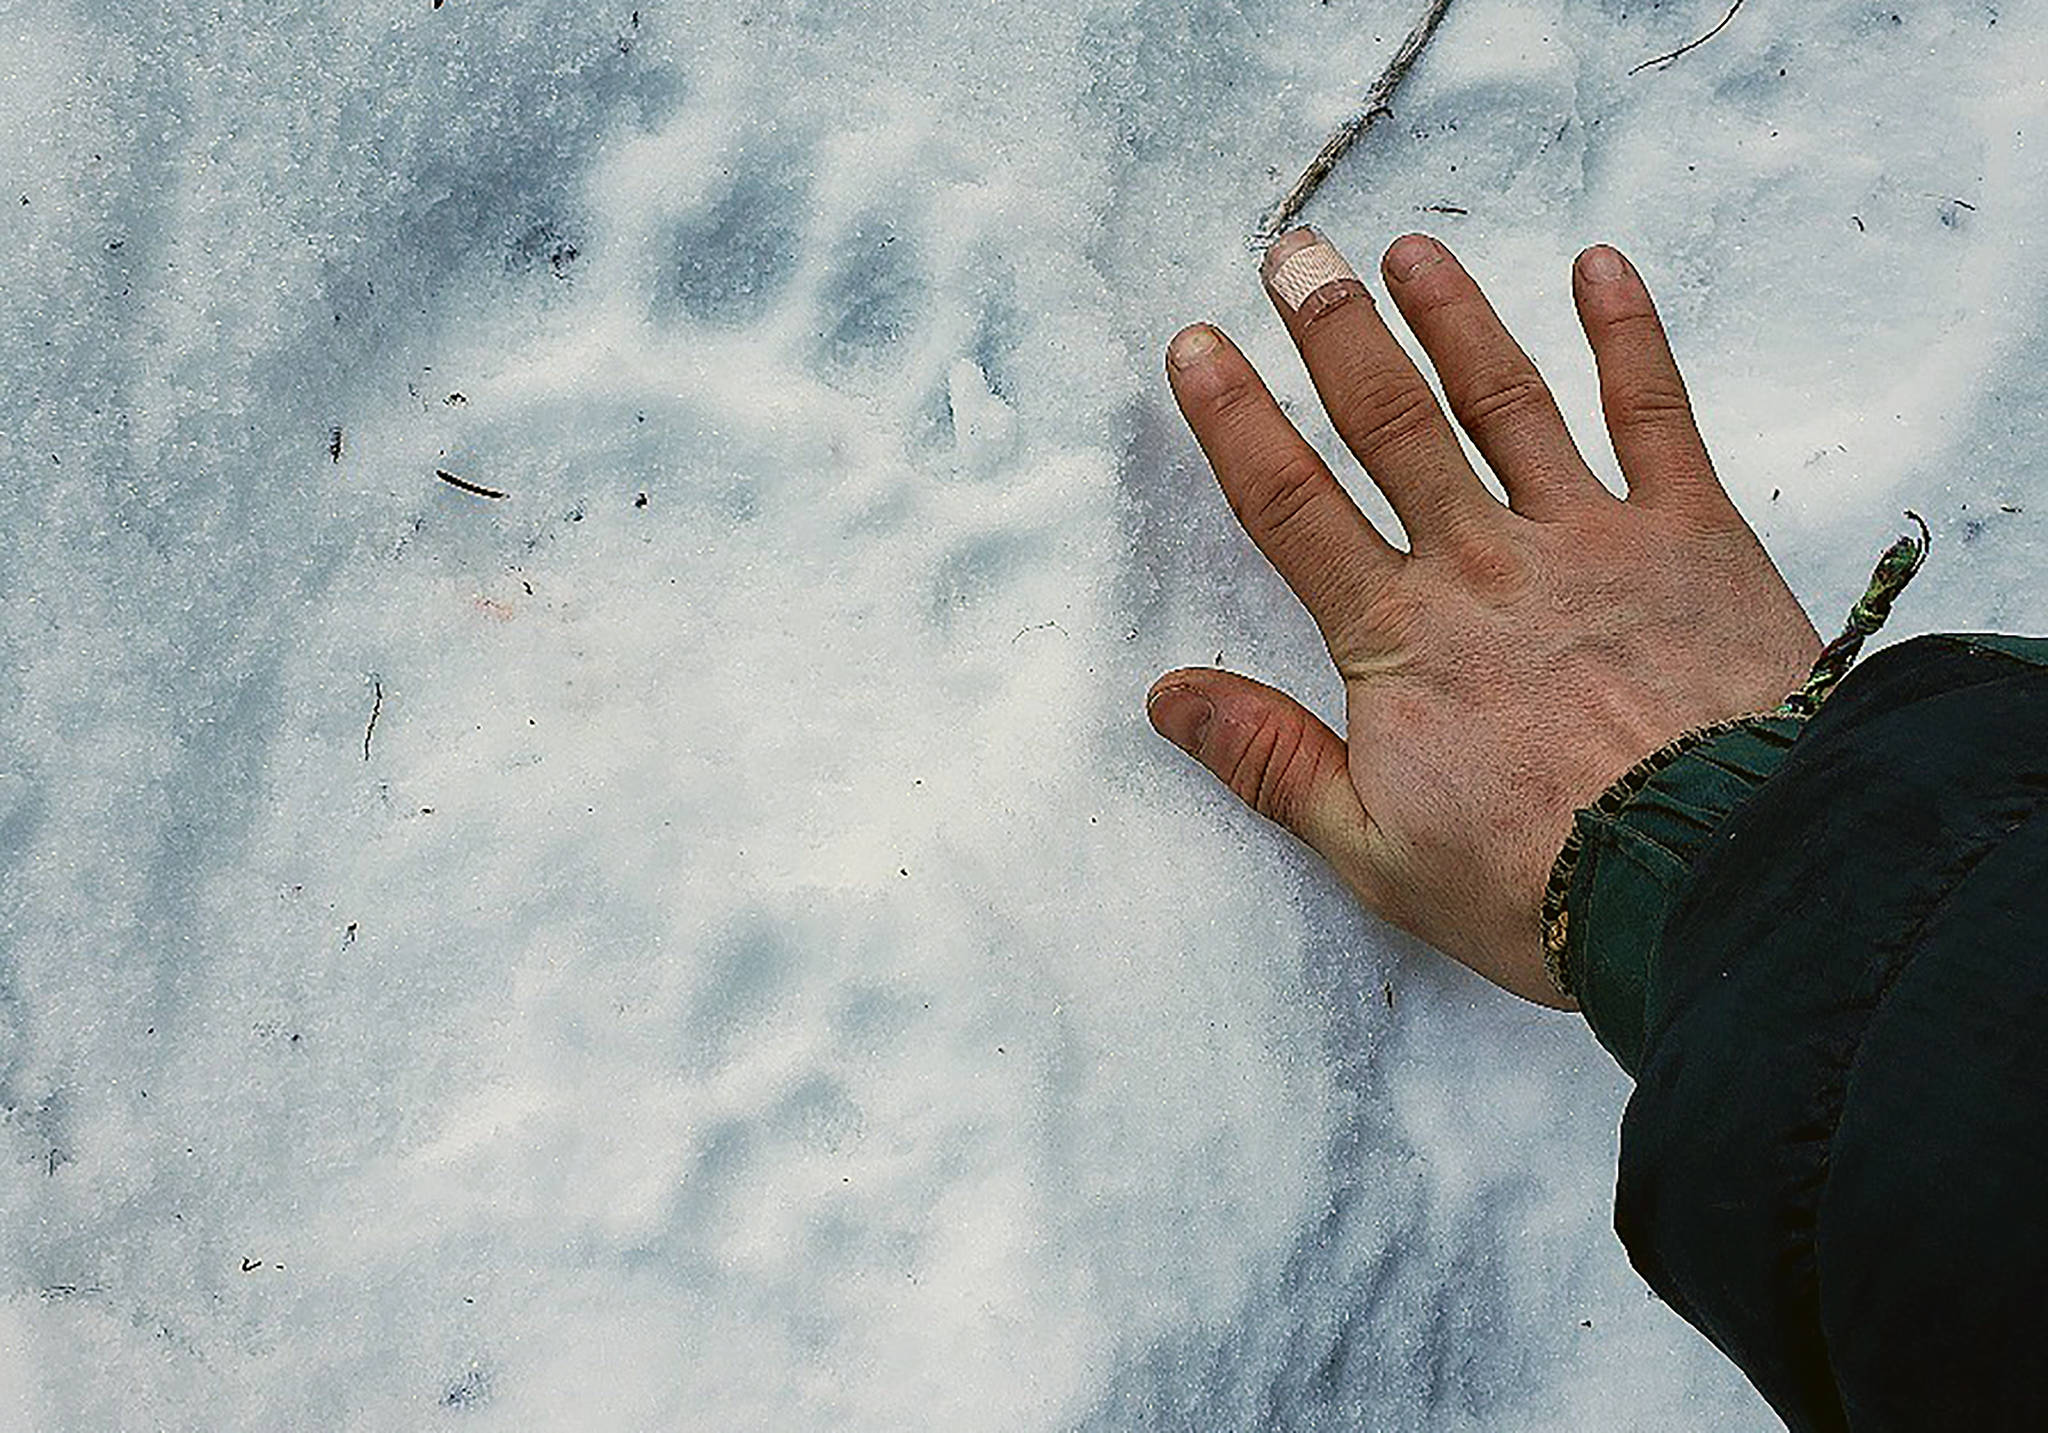 This Feb. 13, 2021 photo provided by Erik Stevens shows a bear track in the Alaska in the backcountry near where resident Shannon Stevens was bit by a bear in an outhouse. Stevens was using an outhouse in the backcountry and she was attacked by a bear, from below.(Erik Stevens via AP)